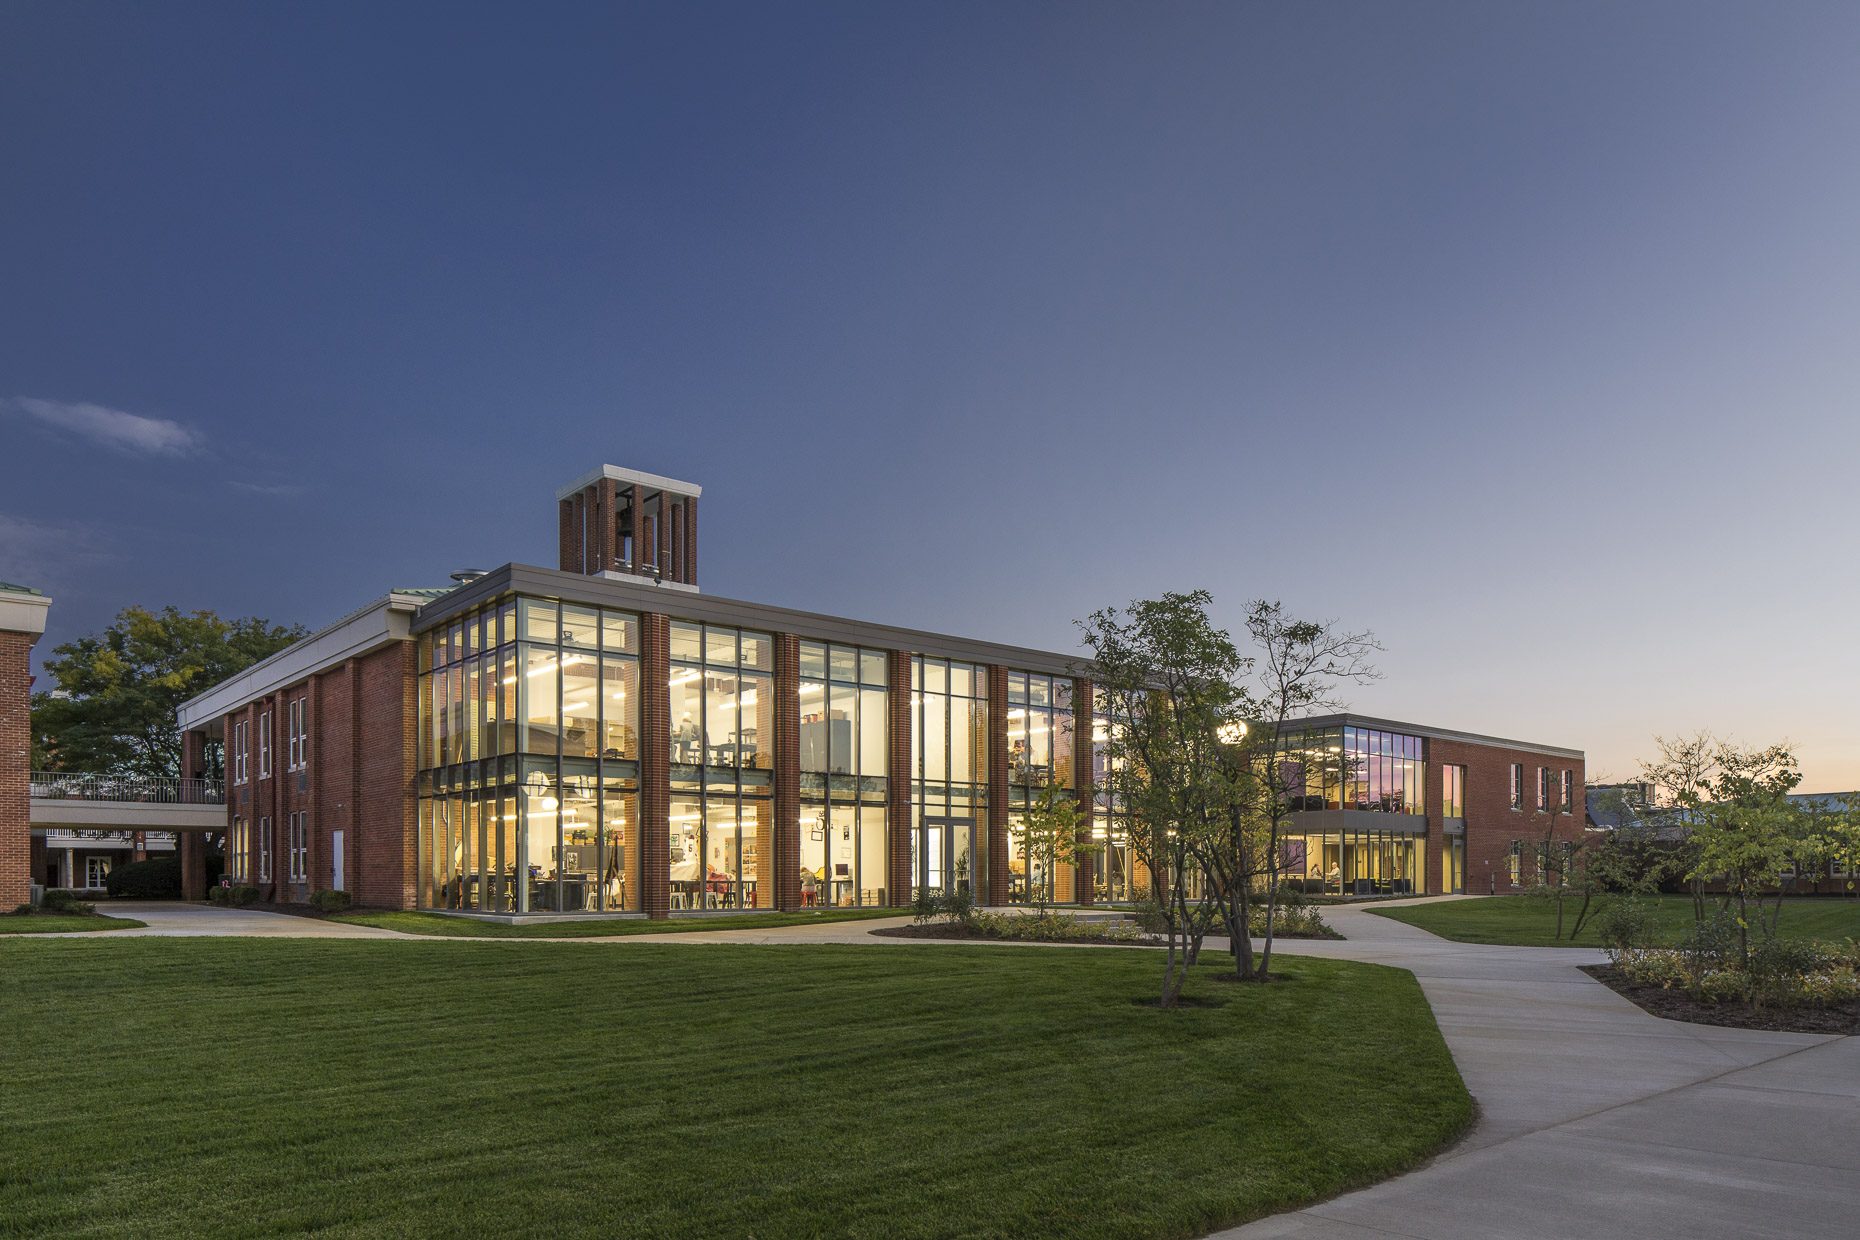 Columbus Academy by The Collaborative photographed by Brad Feinknopf based in Columbus, Ohio